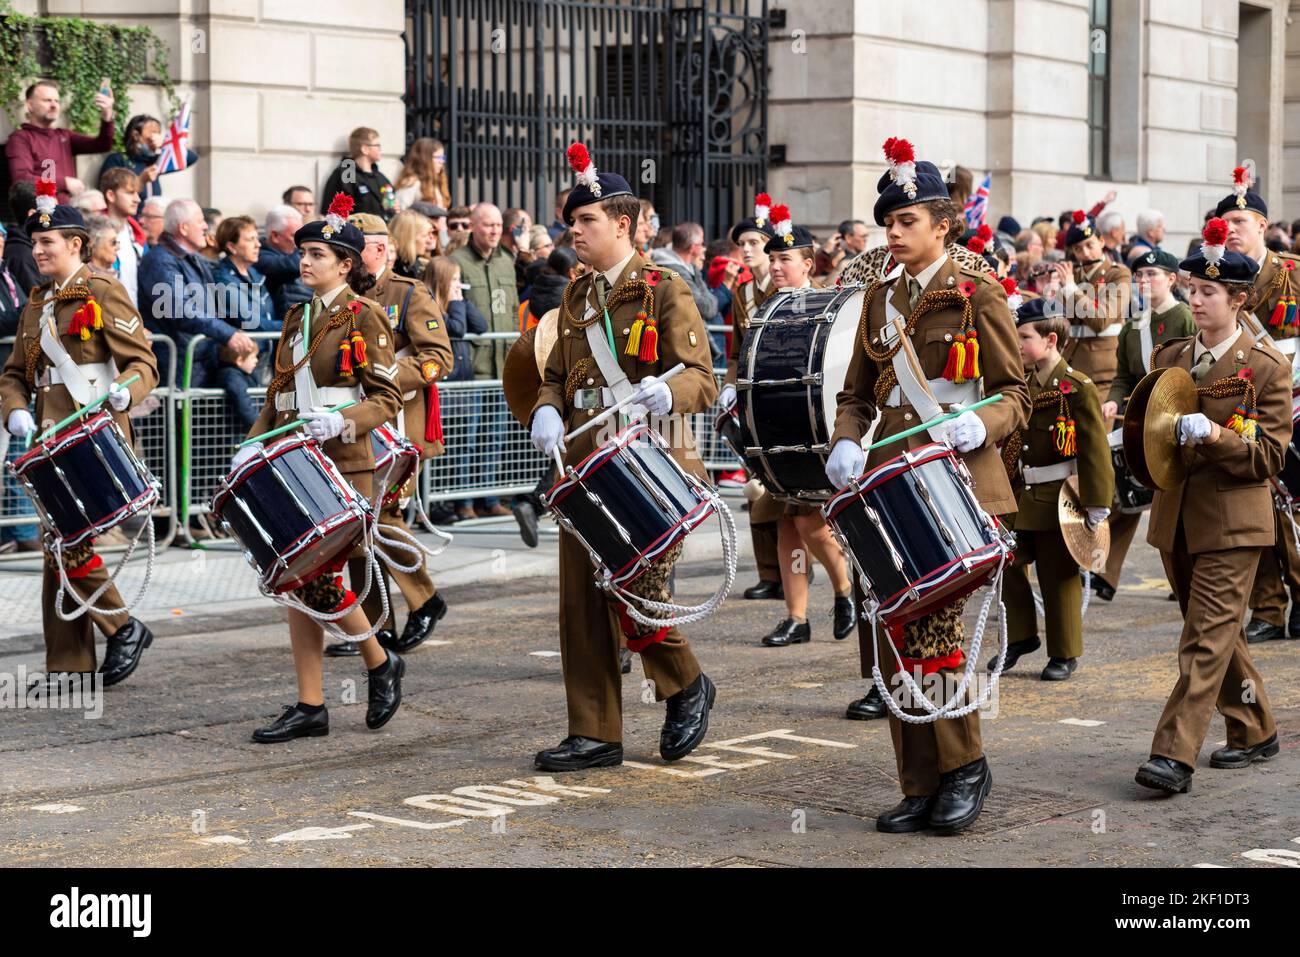 The Royal Regiment of Fusiliers band at the Lord Mayor's Show parade in the City of London, UK. Combined Cadet Force Stock Photo